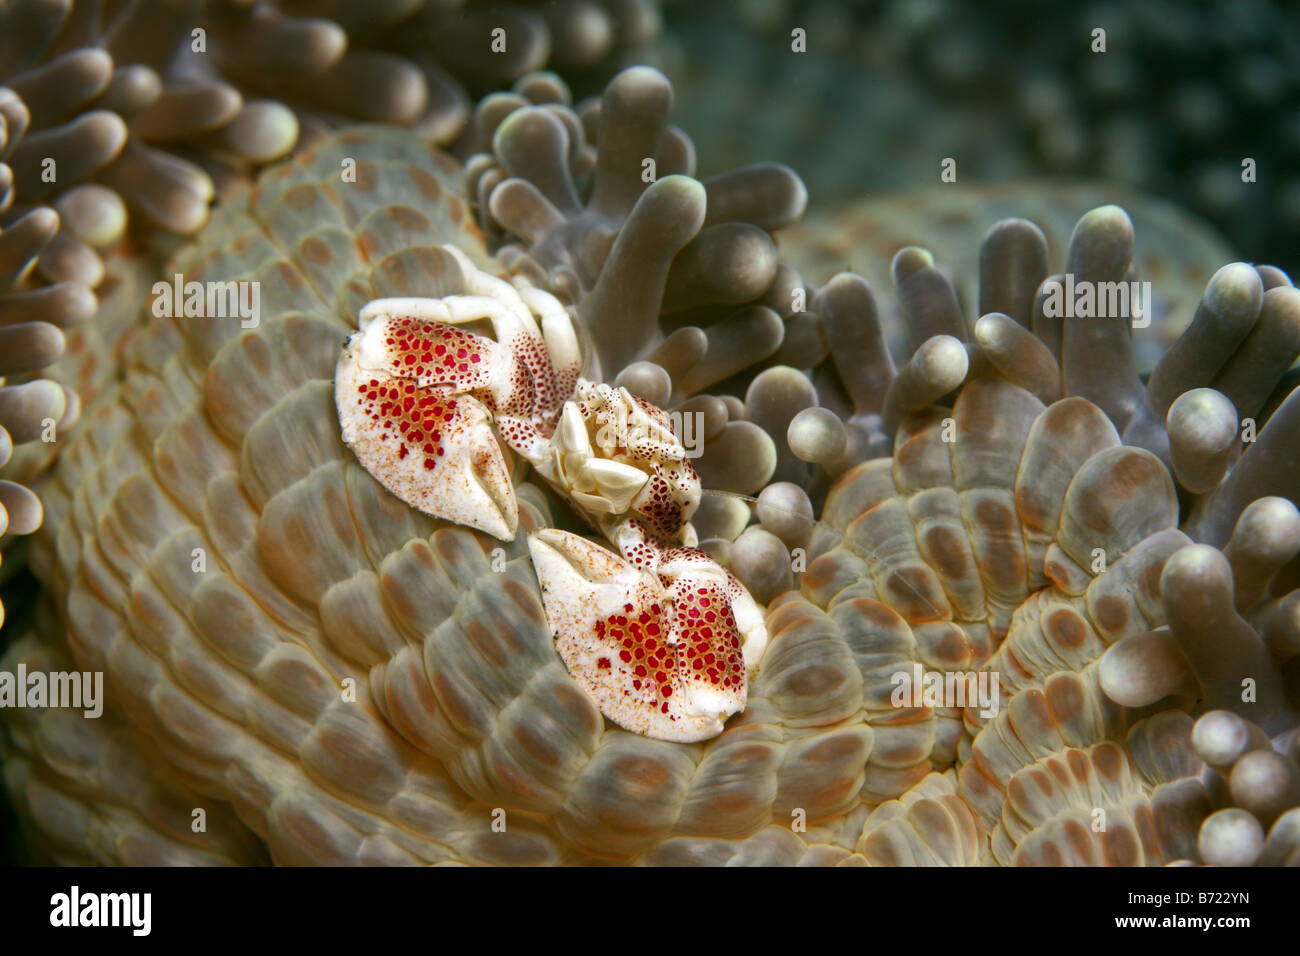 Anemone crab neopetrolisthes ohshima feeding on south pacific anenome Stock Photo